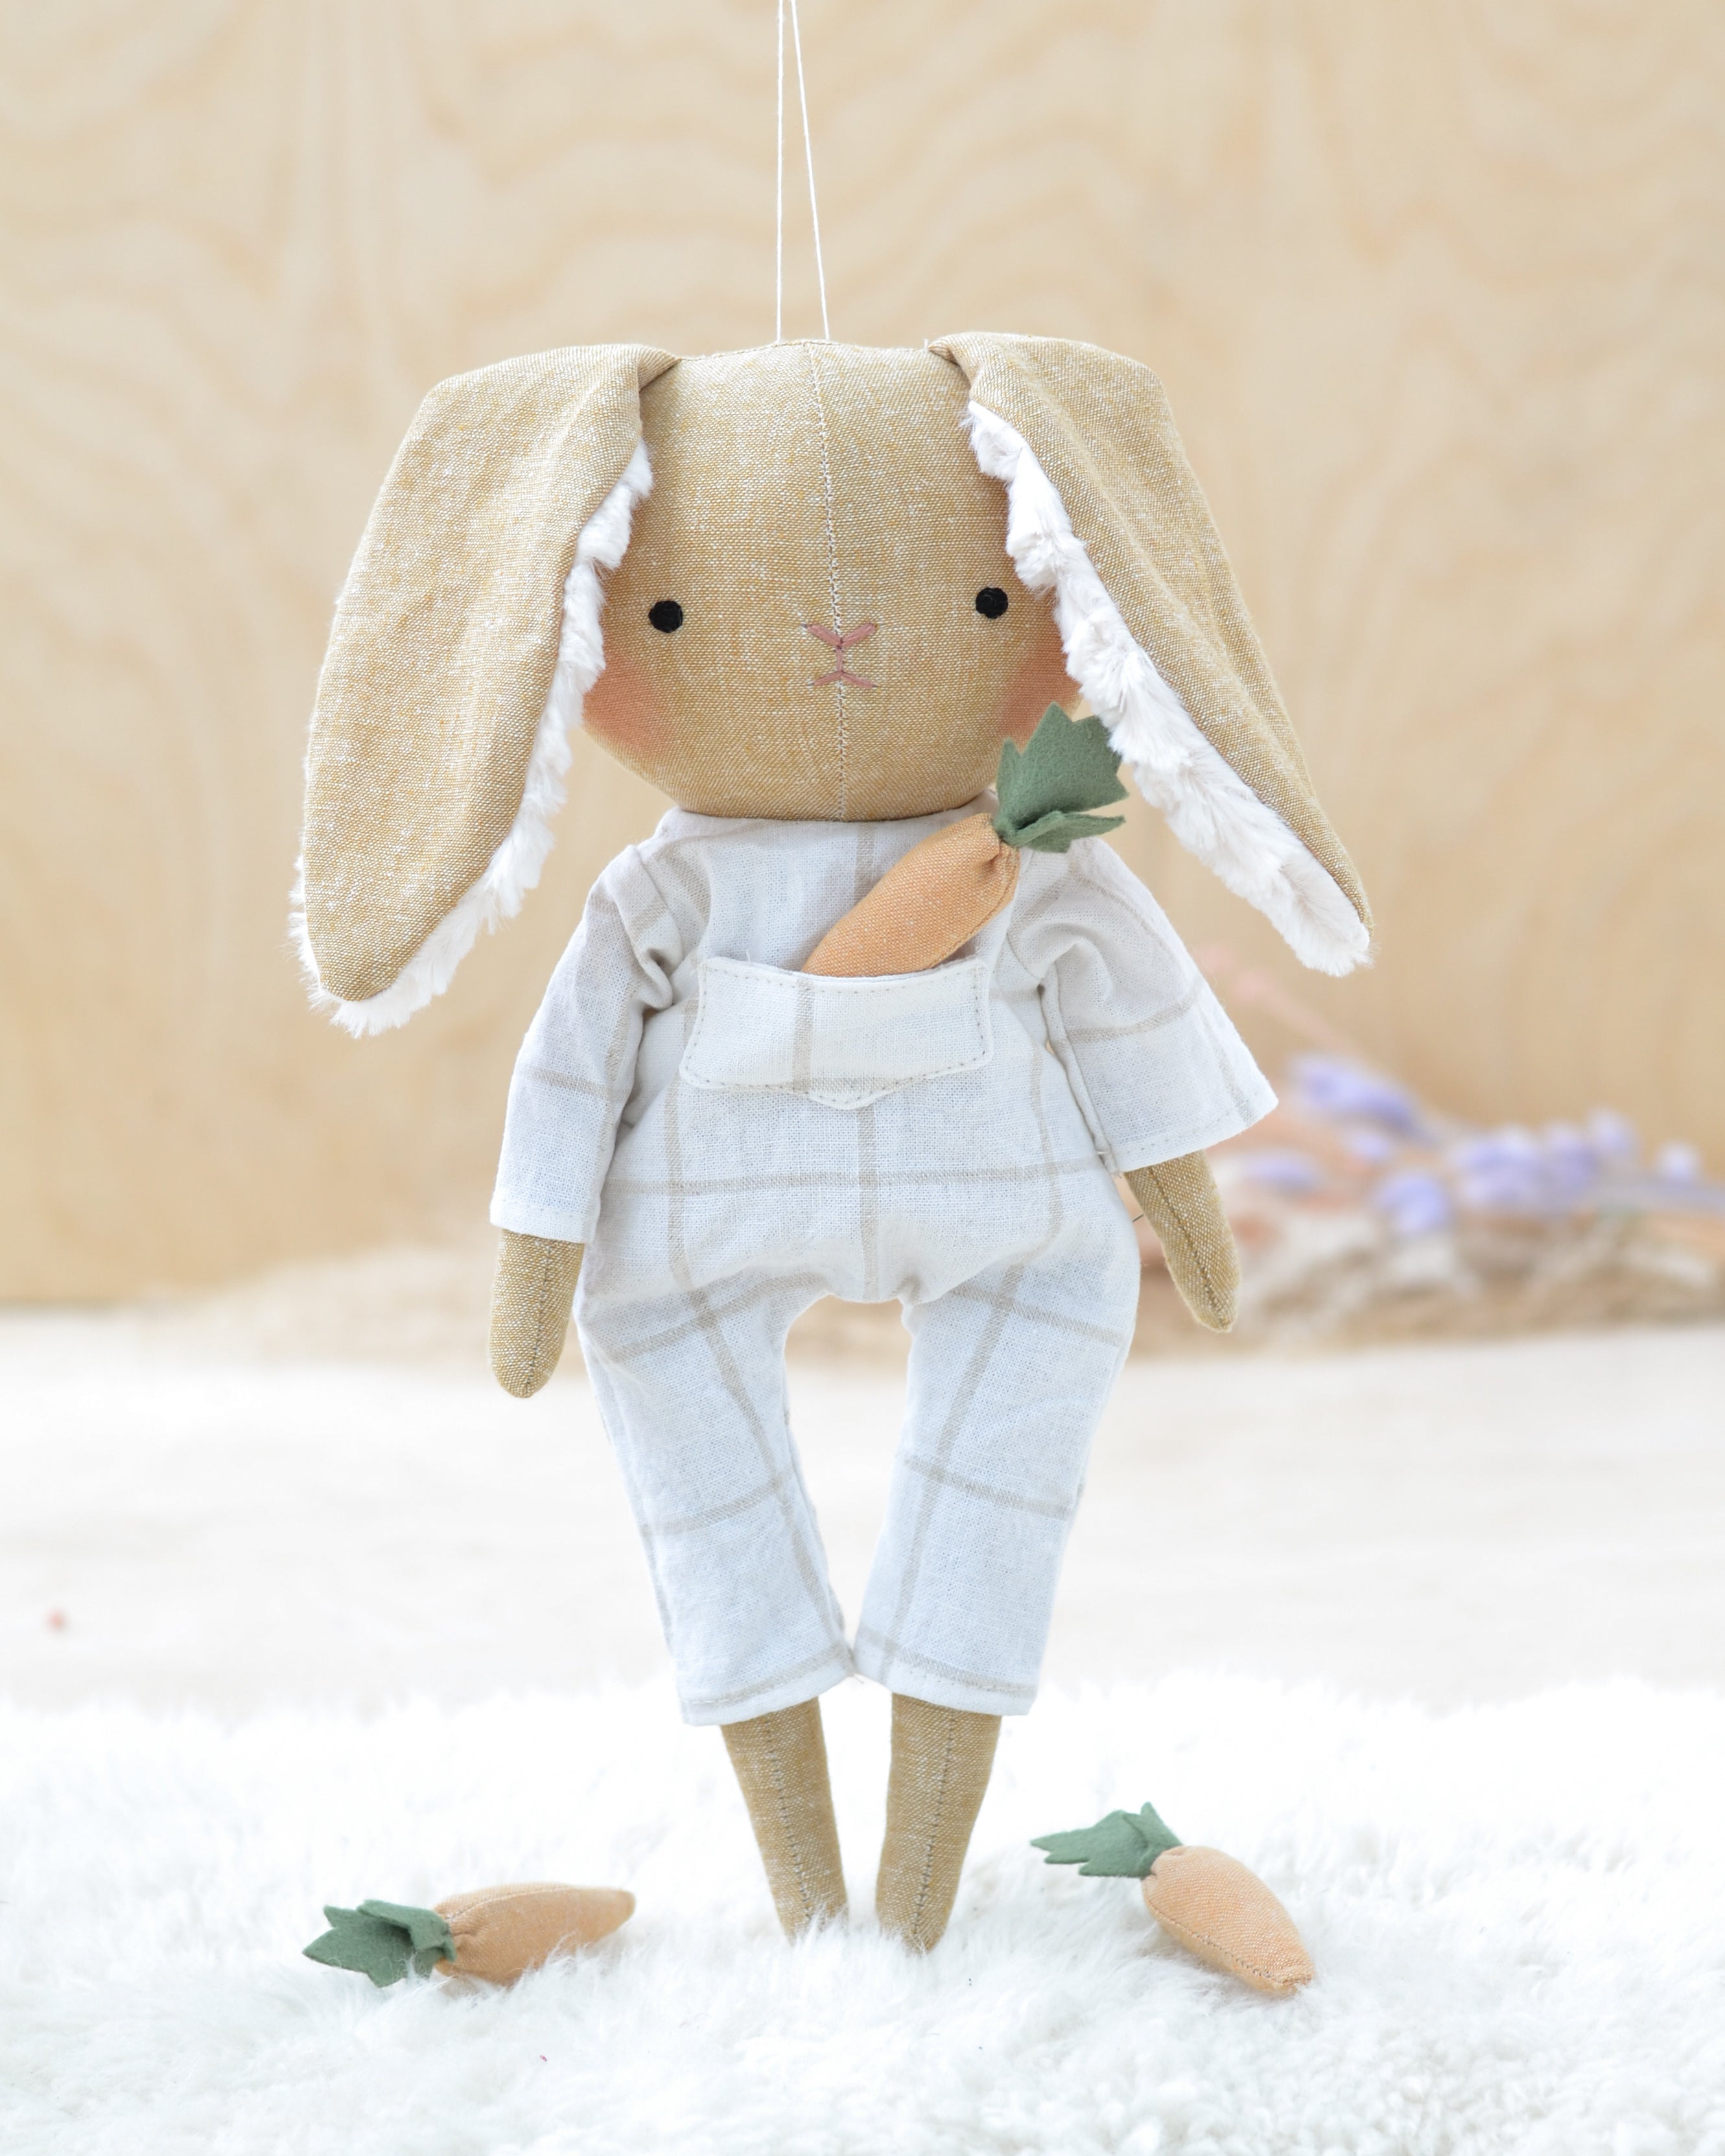 Sewing Pattern - Bunny Pattern + 2 outfits